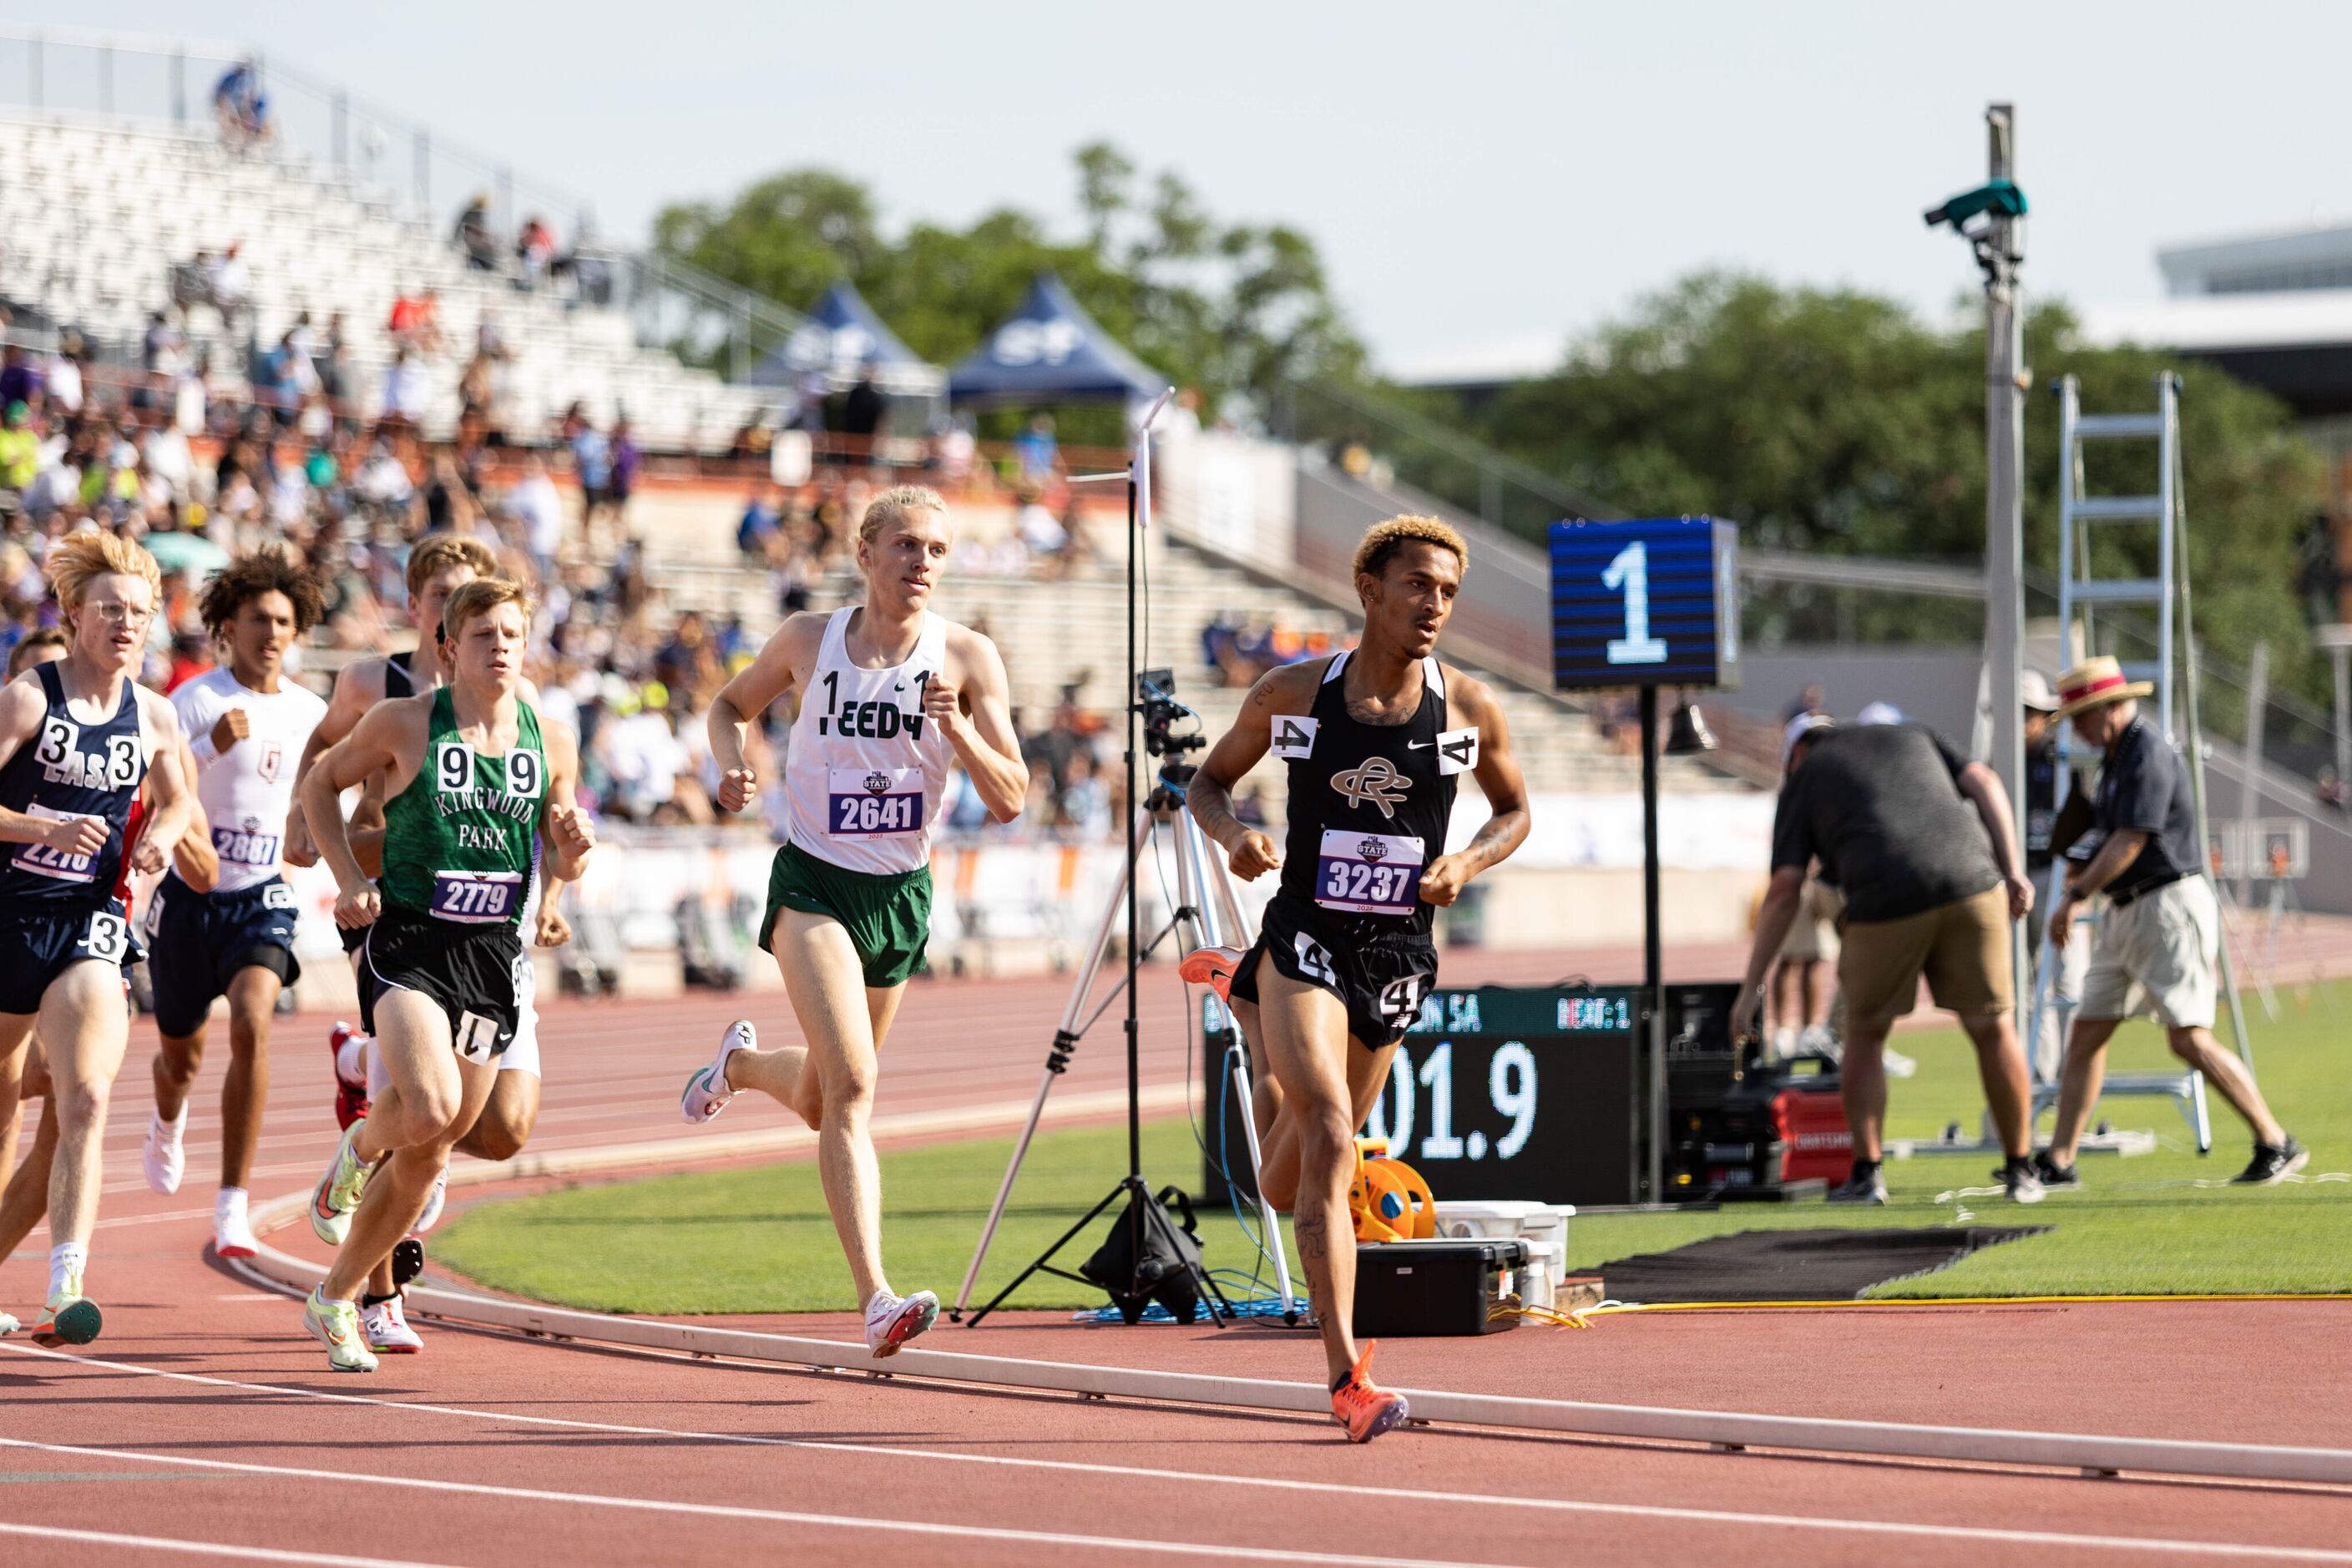 Chasetin Winston of Royse City leads the boys’ 800m final at the start of the bell lap at...